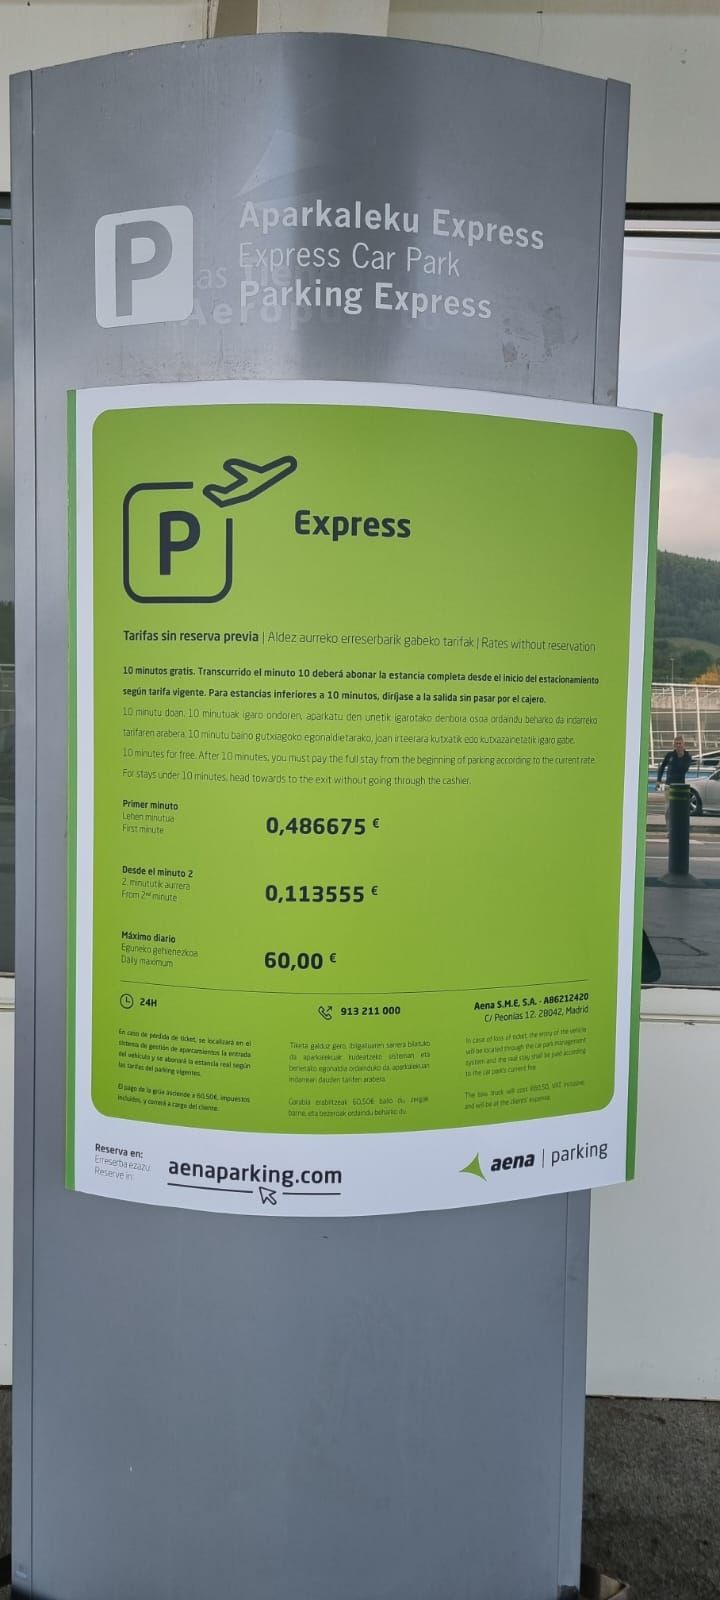 Picture of a car park information sign, presumably in the Basque Country, stating that the first minute costs €0.486675 and subsequent minutes €0.113555. Photo by Chris Sangwin.